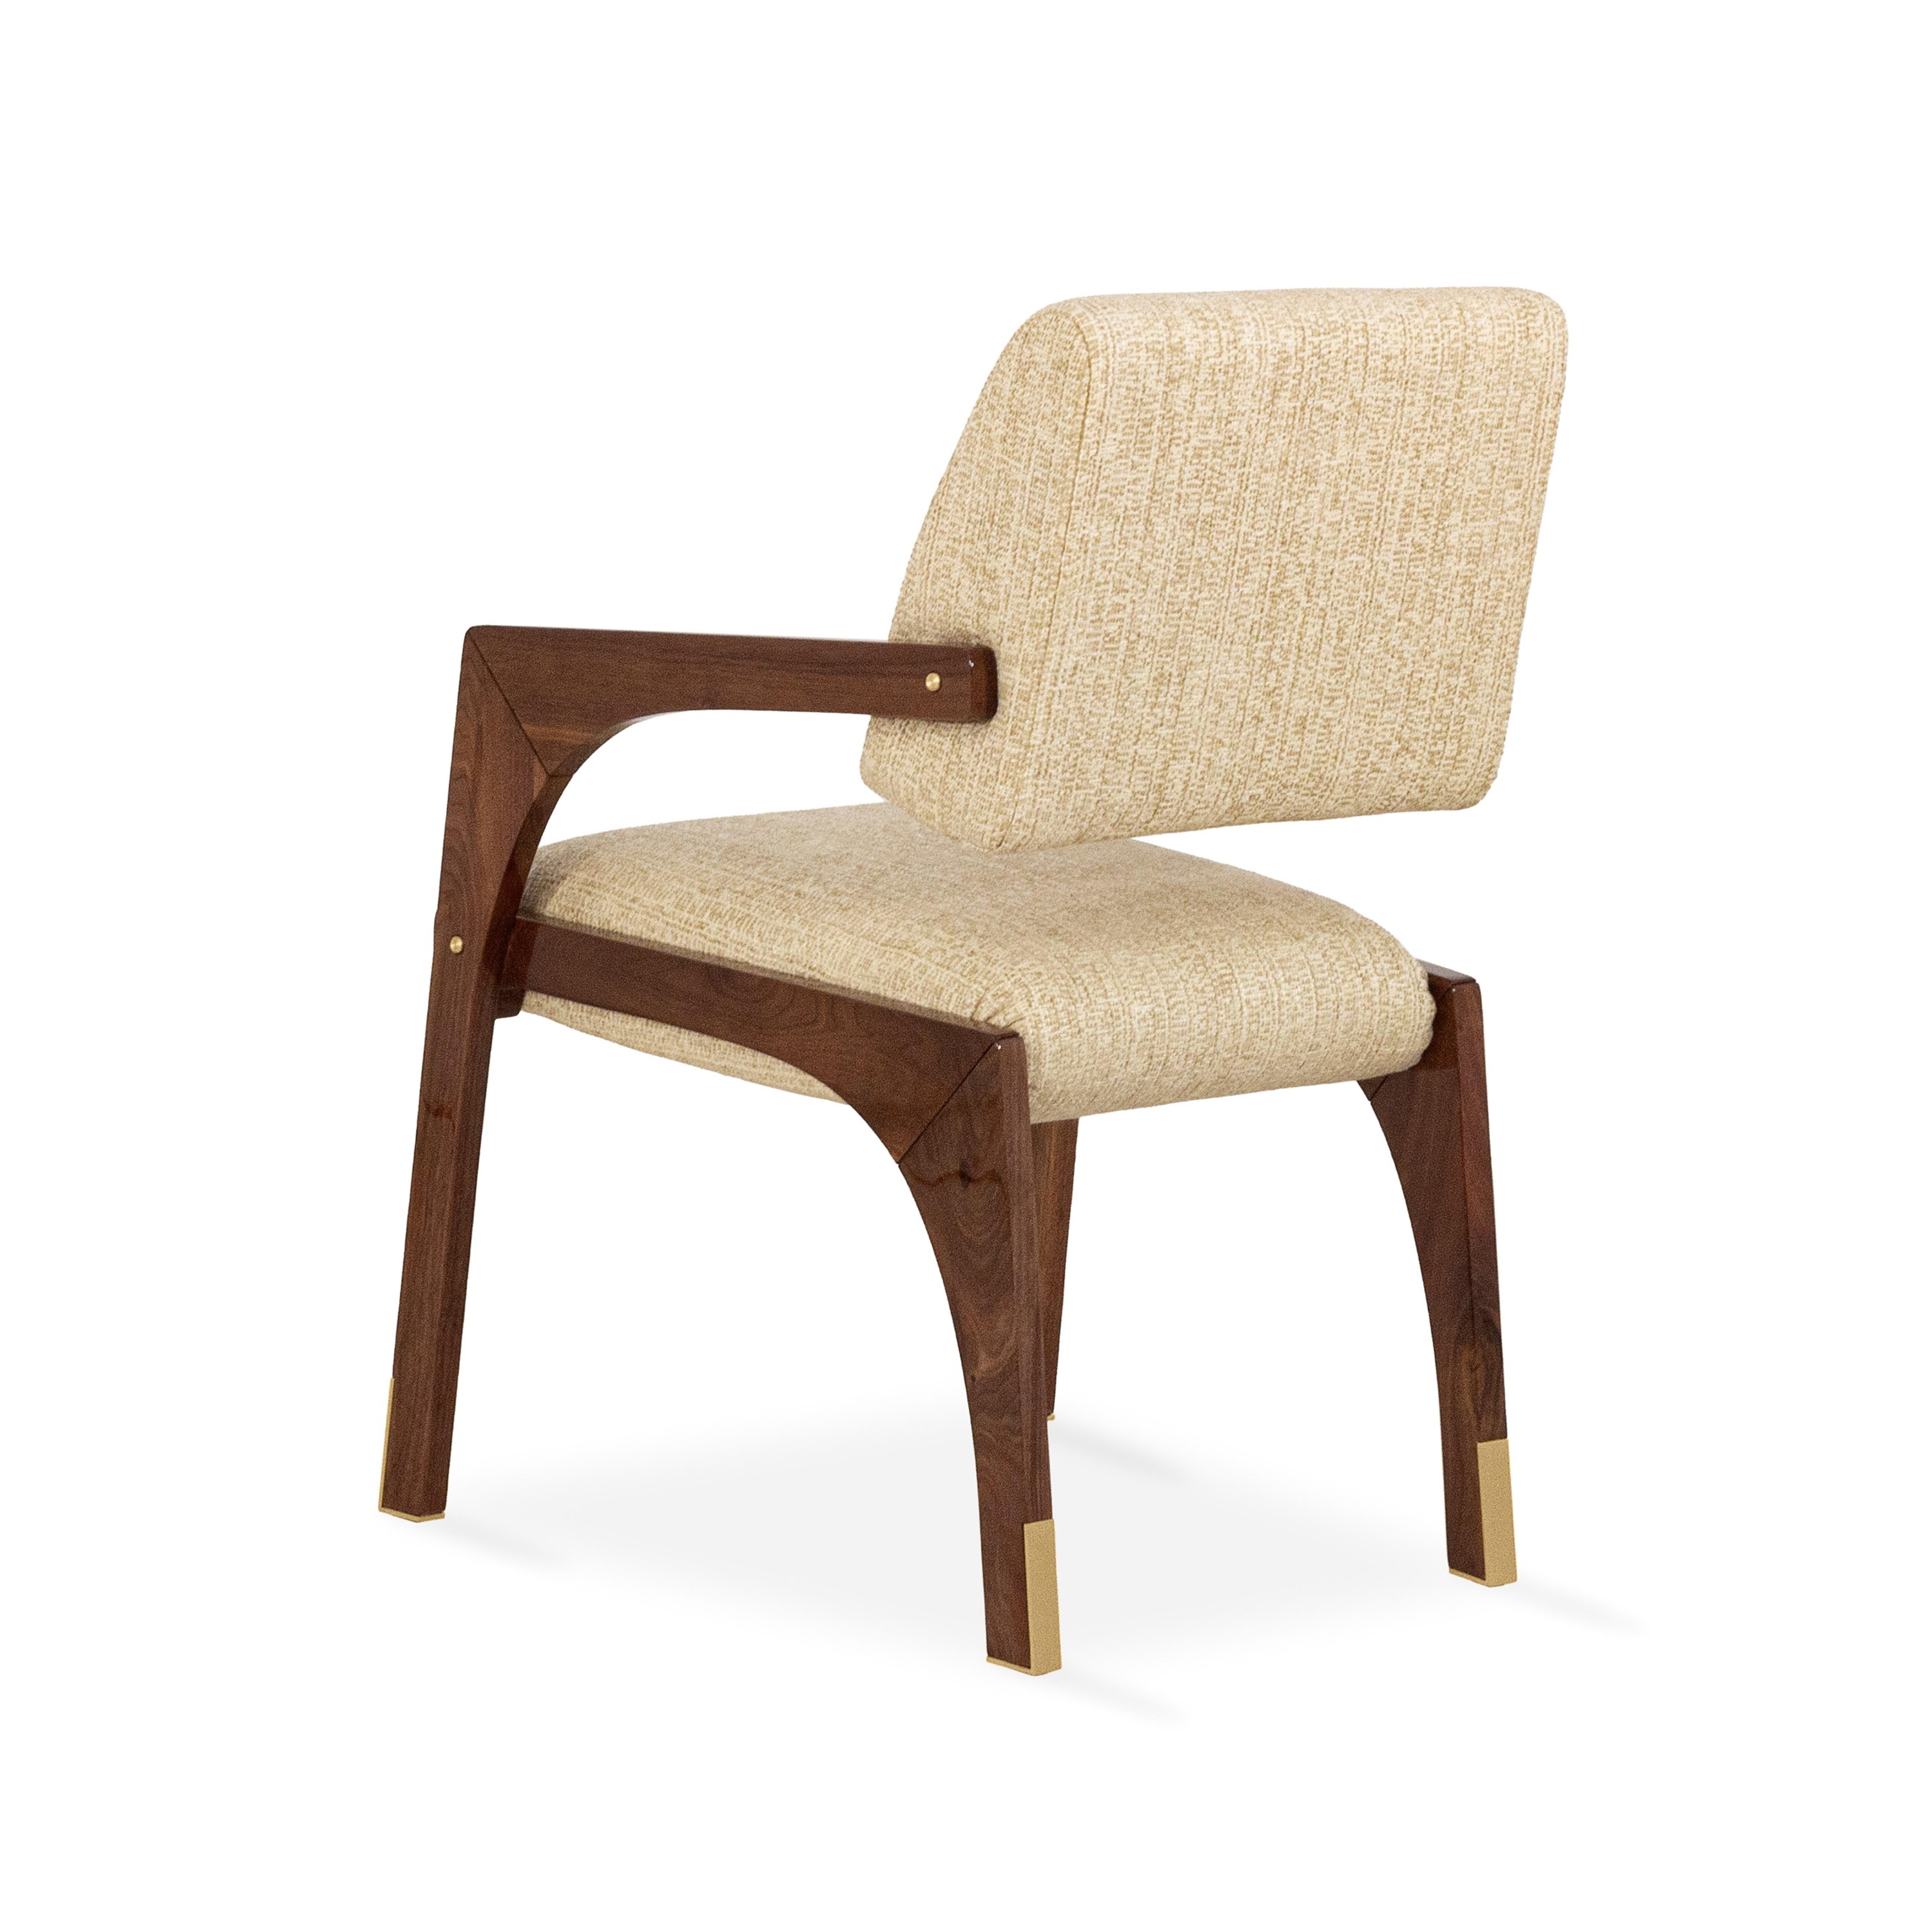 Portuguese Arches Dining Chair, Walnut & Brass, InsidherLand by Joana Santos Barbosa For Sale